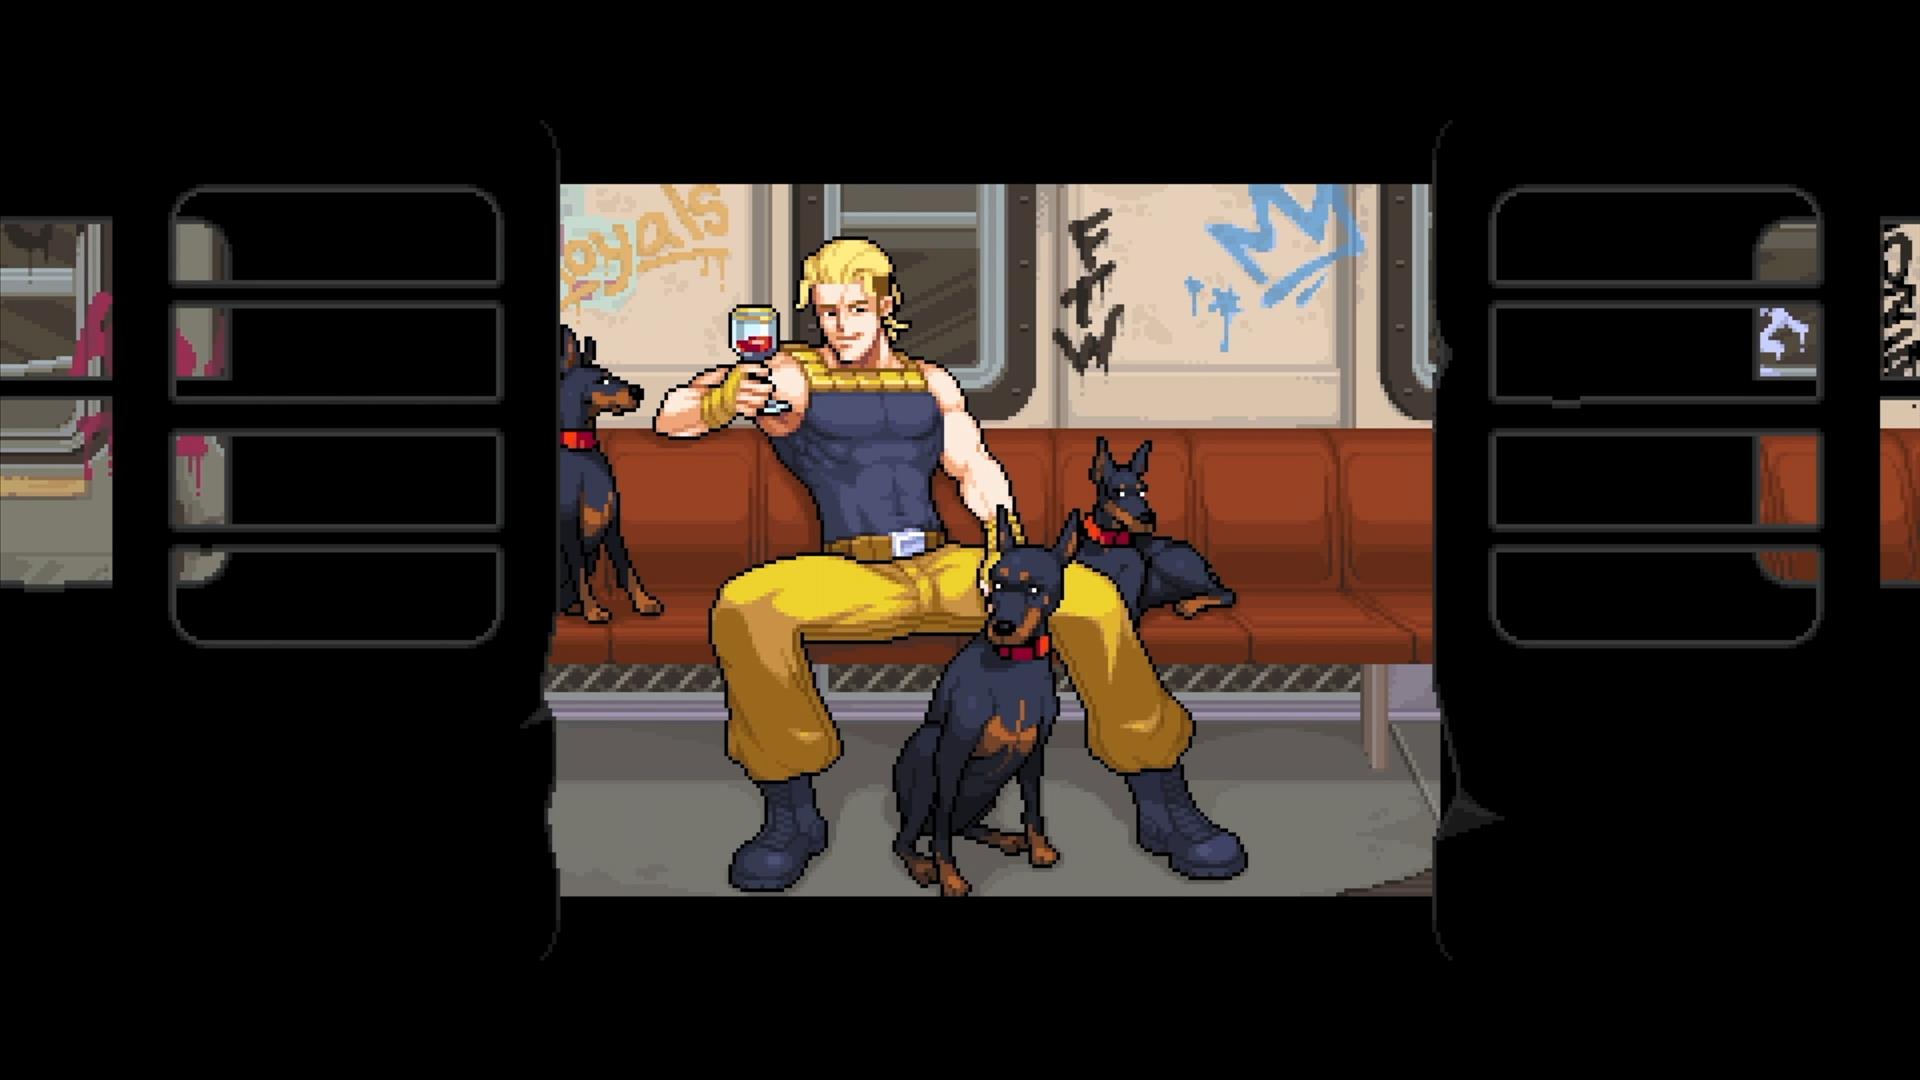 Play SNES Super Double Dragon (USA) Online in your browser 